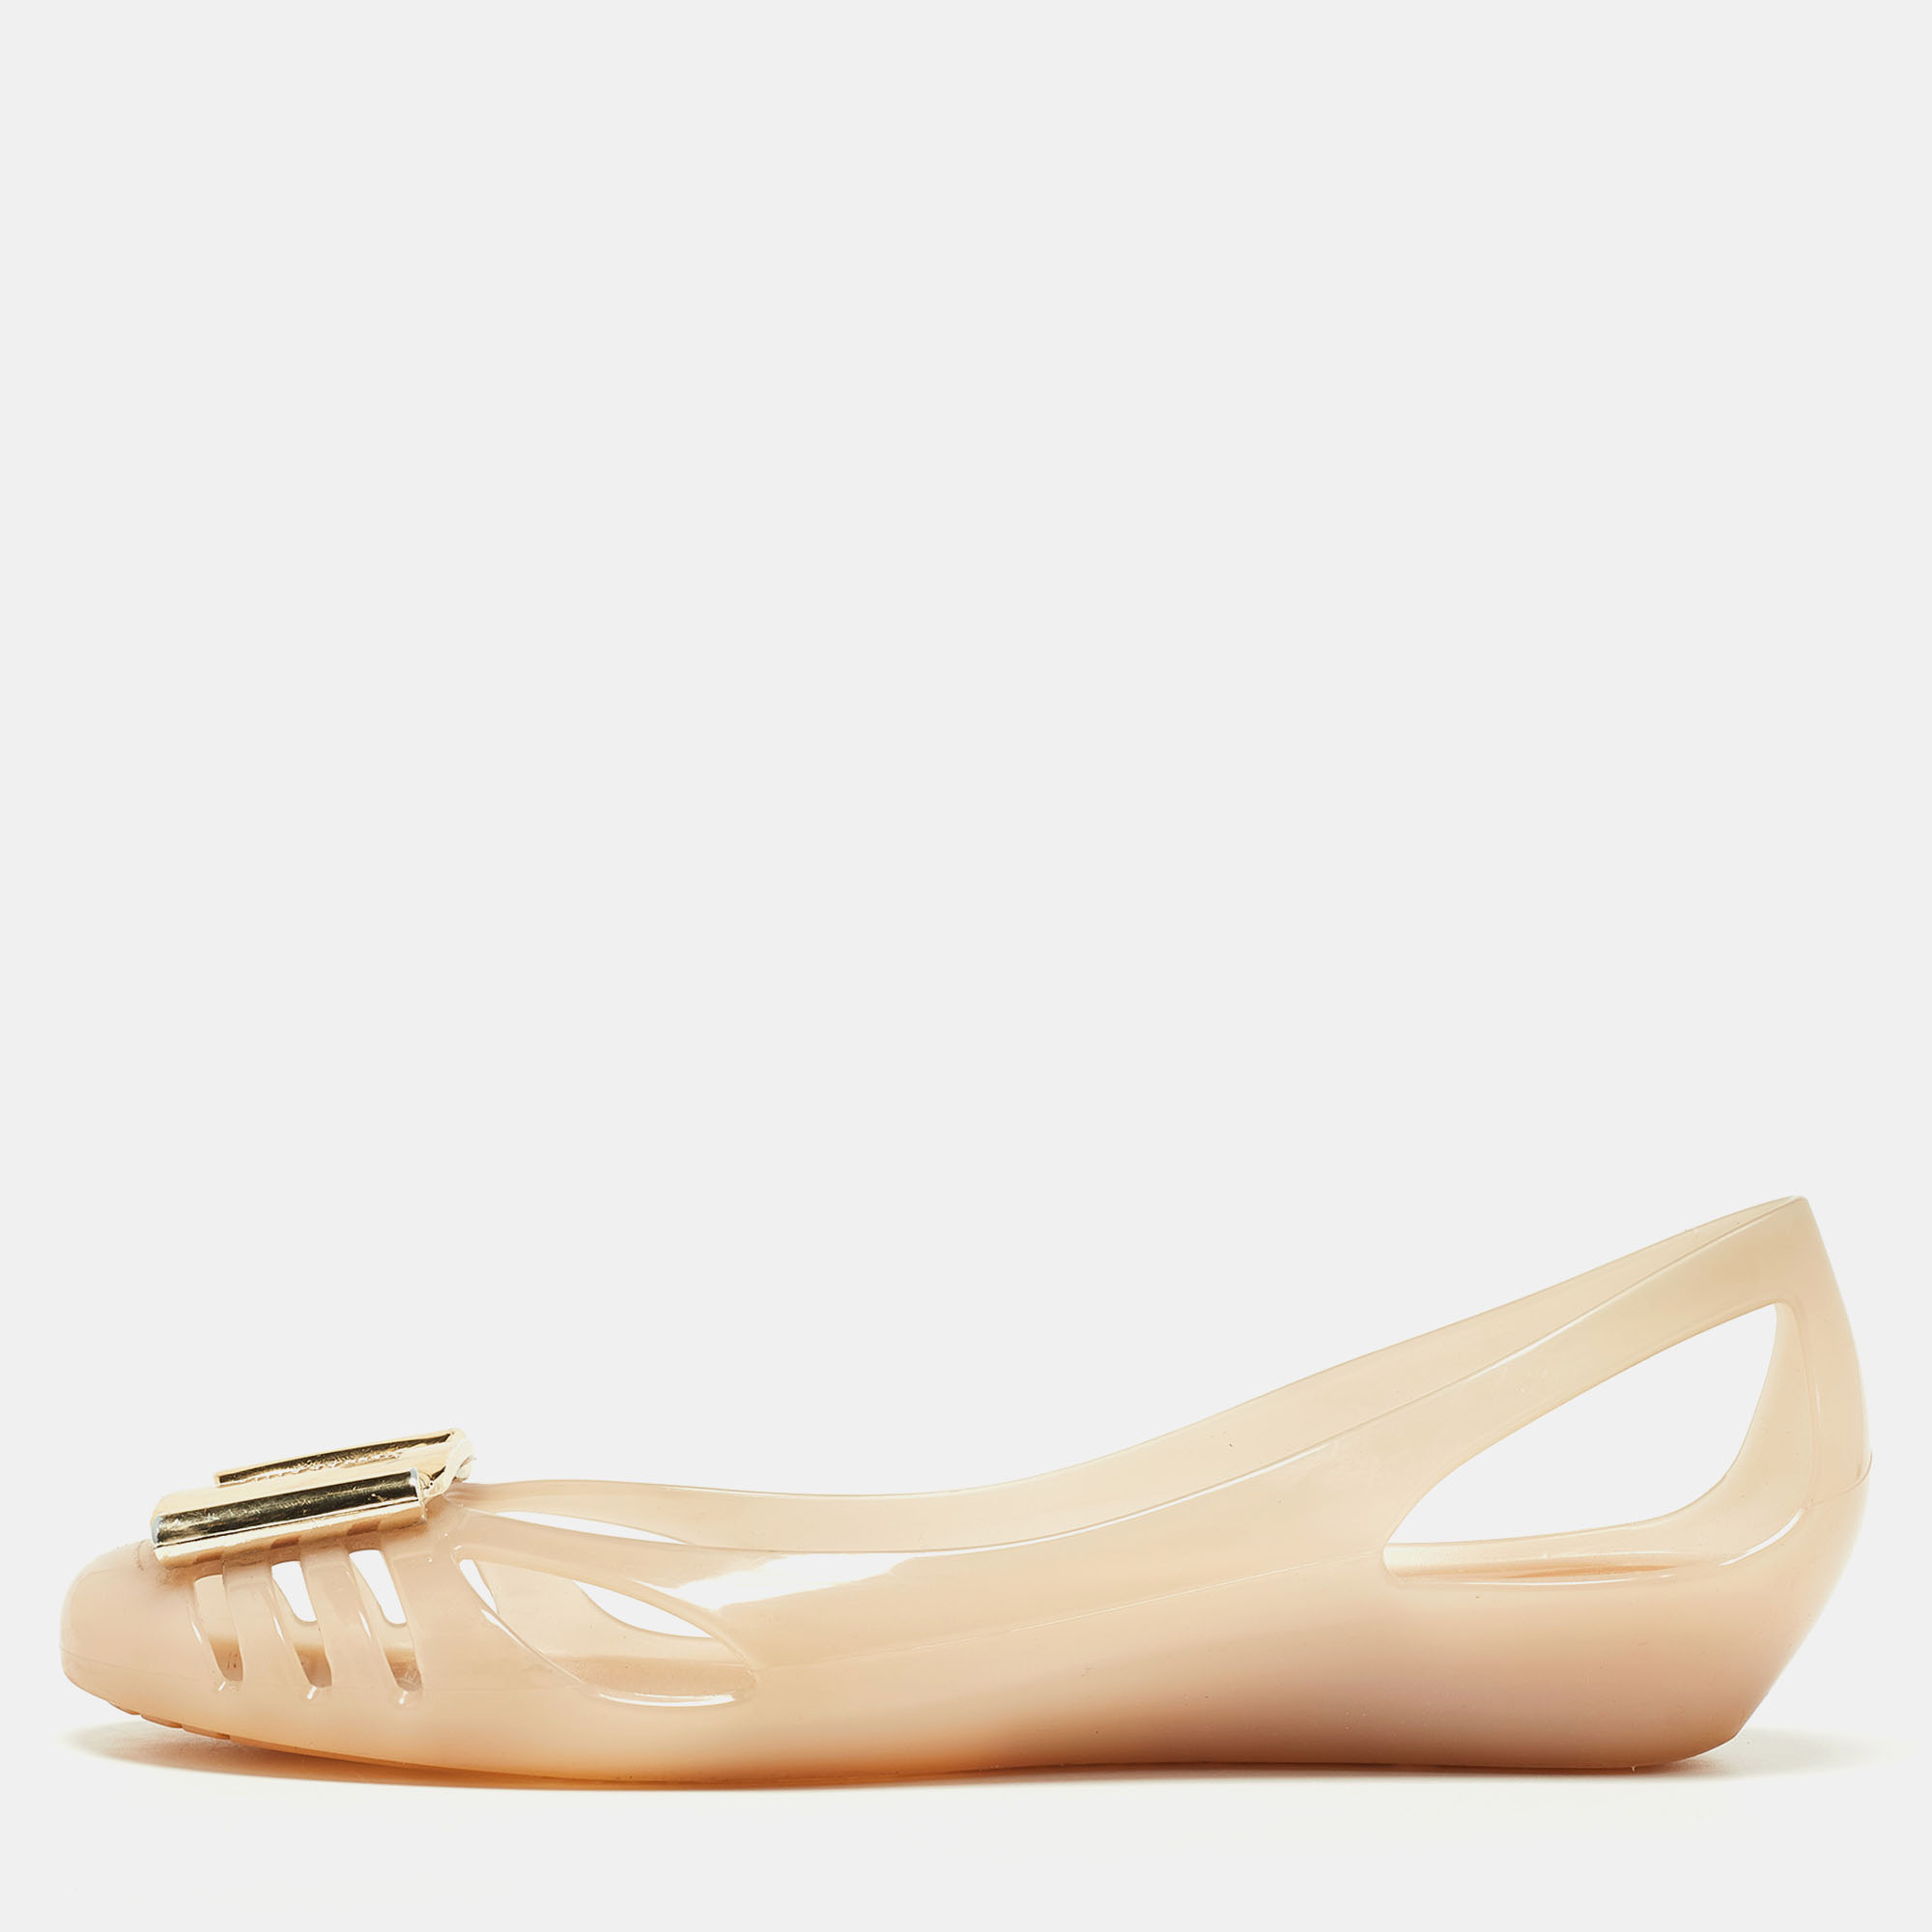 These Bermuda flats from Salvatore Ferragamo are simply elegant and luxe. Crafted from beige PVC they flaunt metal logo plaques and cutout detailing. The pair is complete with low wedge heels and comfortable insoles.